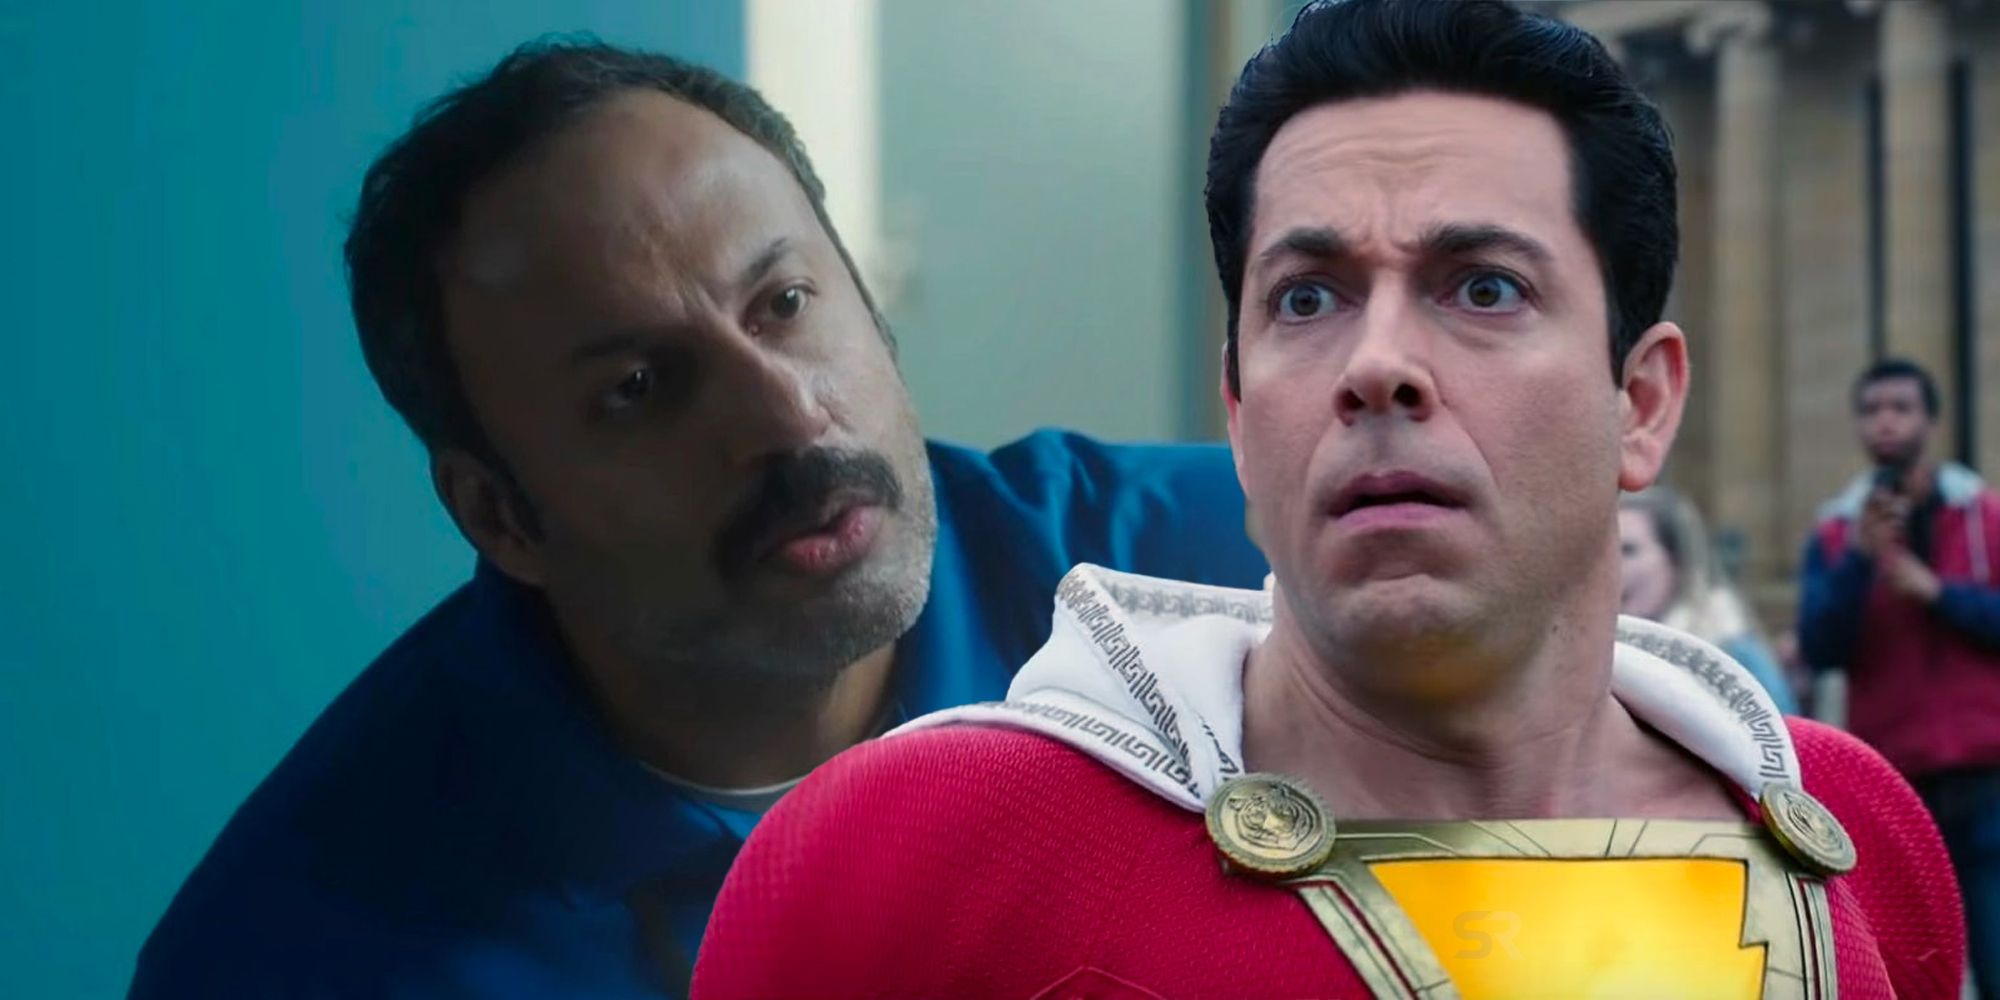 Shazam! Fury of the Gods Trailer Features The Suicide Squad Easter Egg